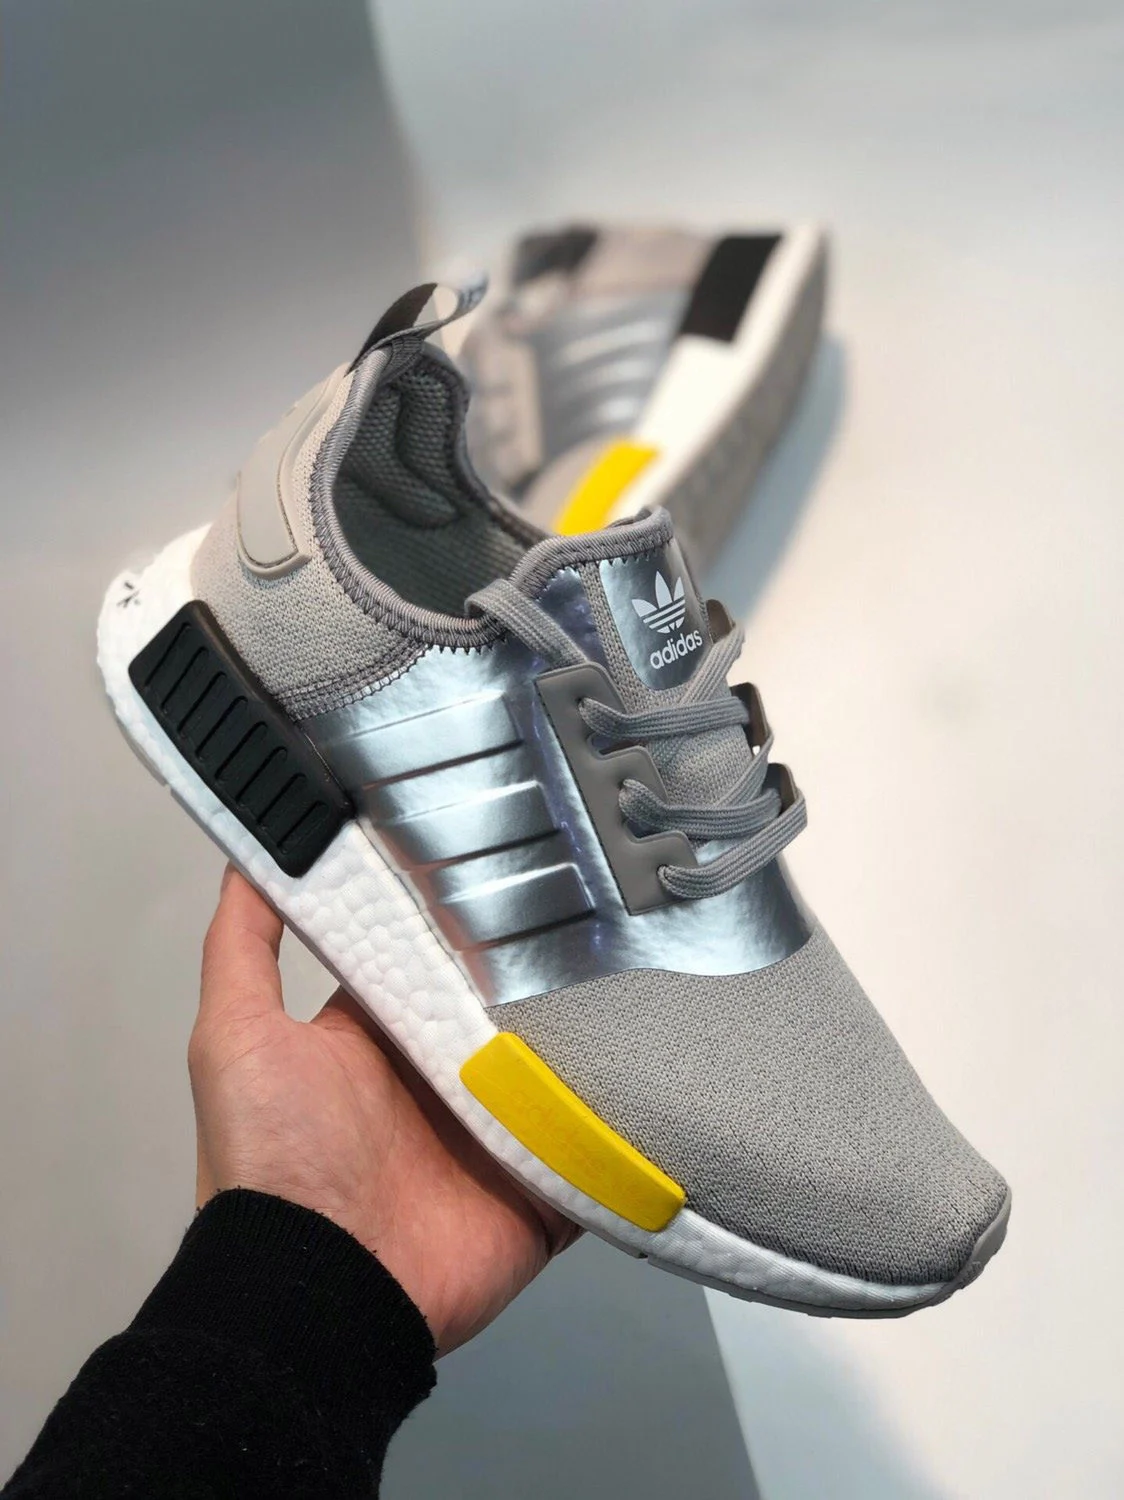 Adidas NMD R1 Metal Grey Yellow-Core Black For Sale